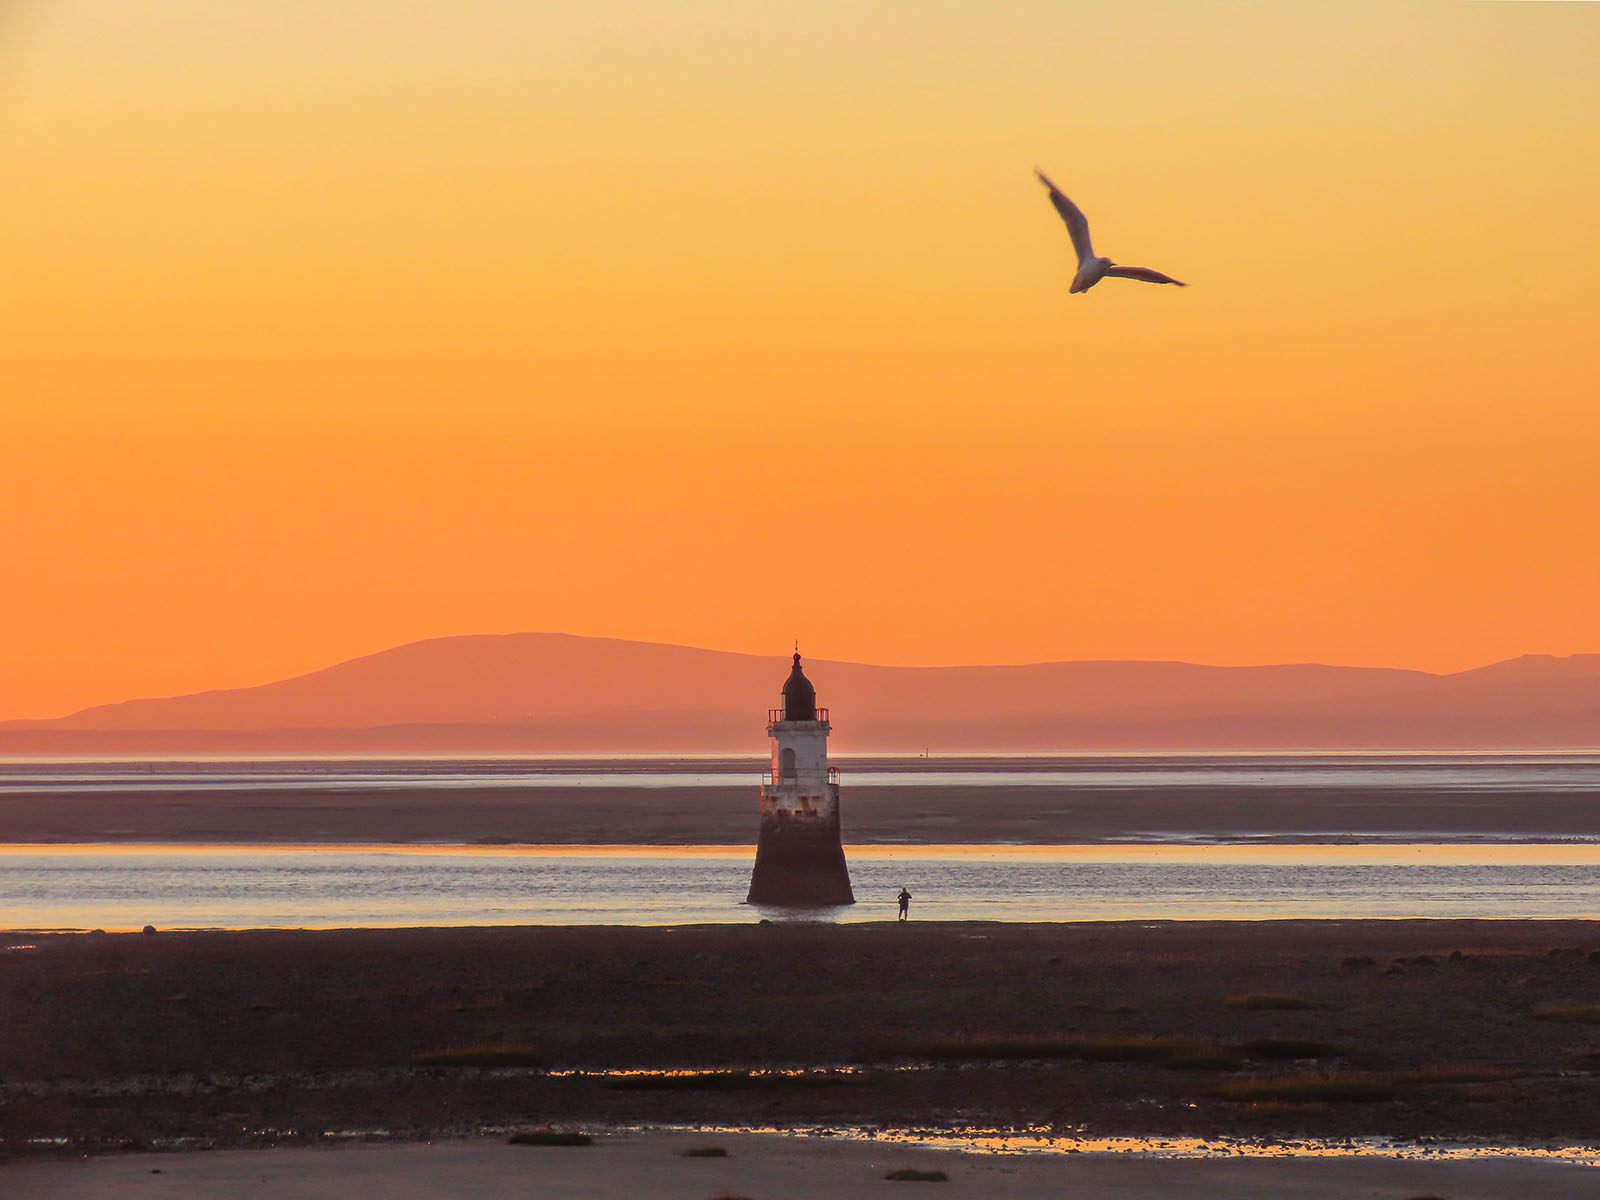 Plover Scar Lighthouse at Sunset, Janet Whitlow